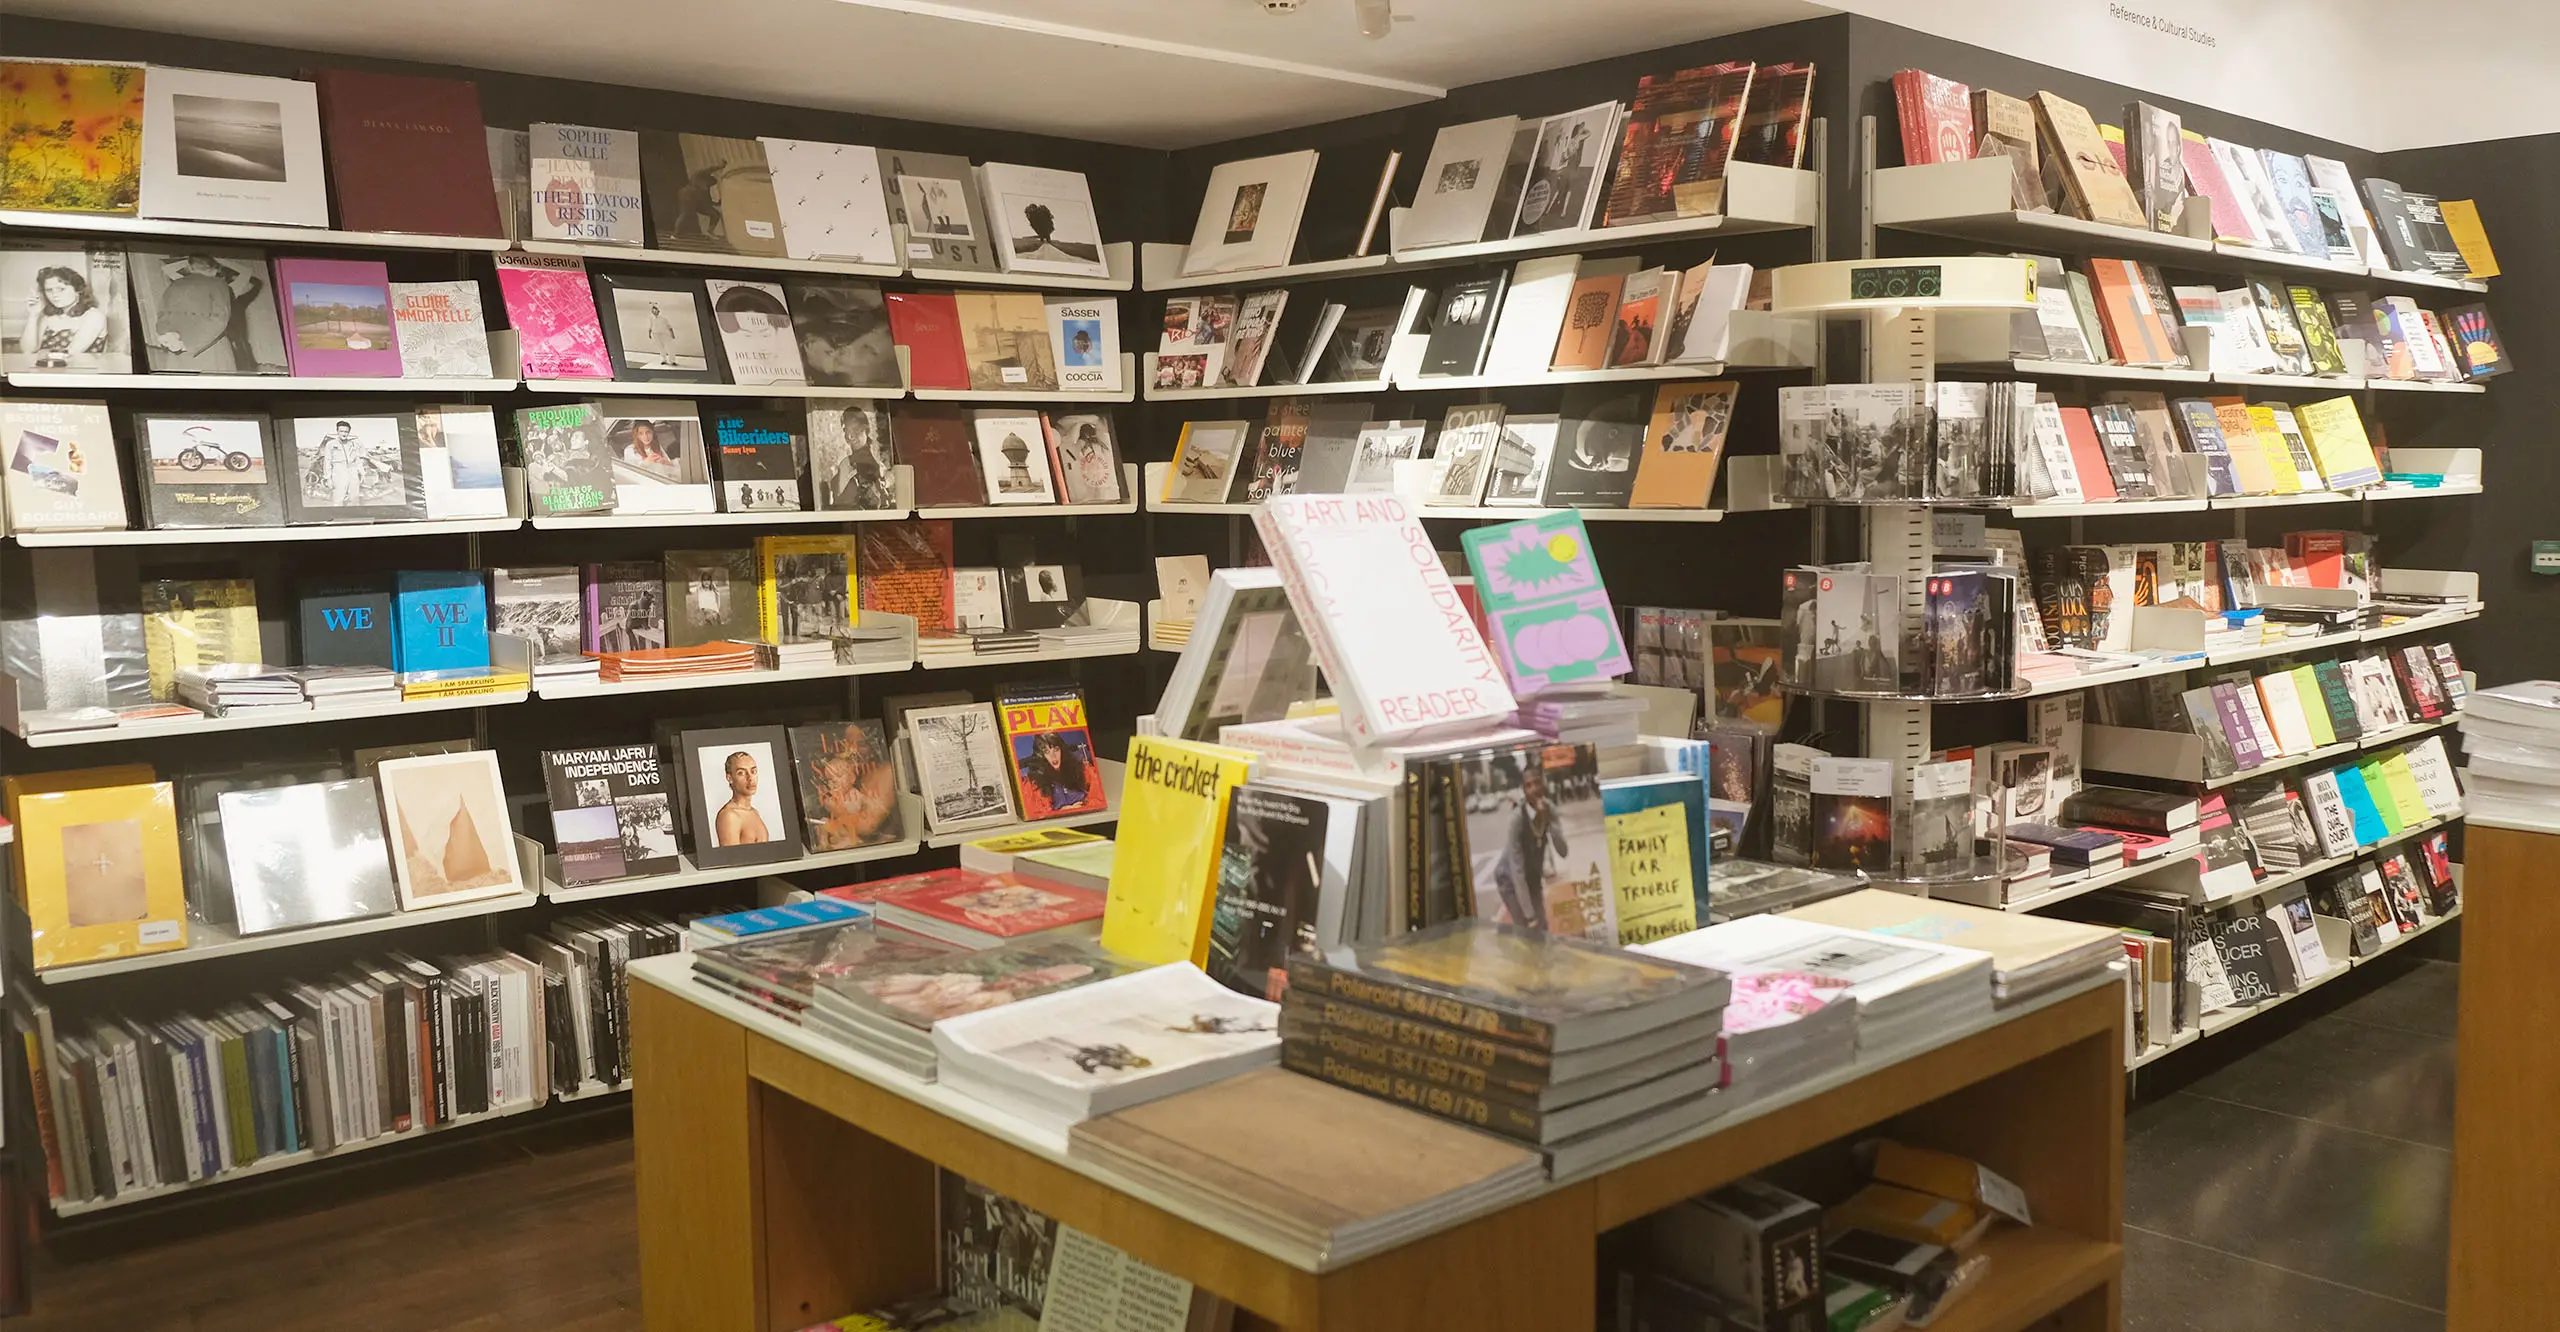 A photograph of shelves of books on display at The Photographers' Gallery Bookshop